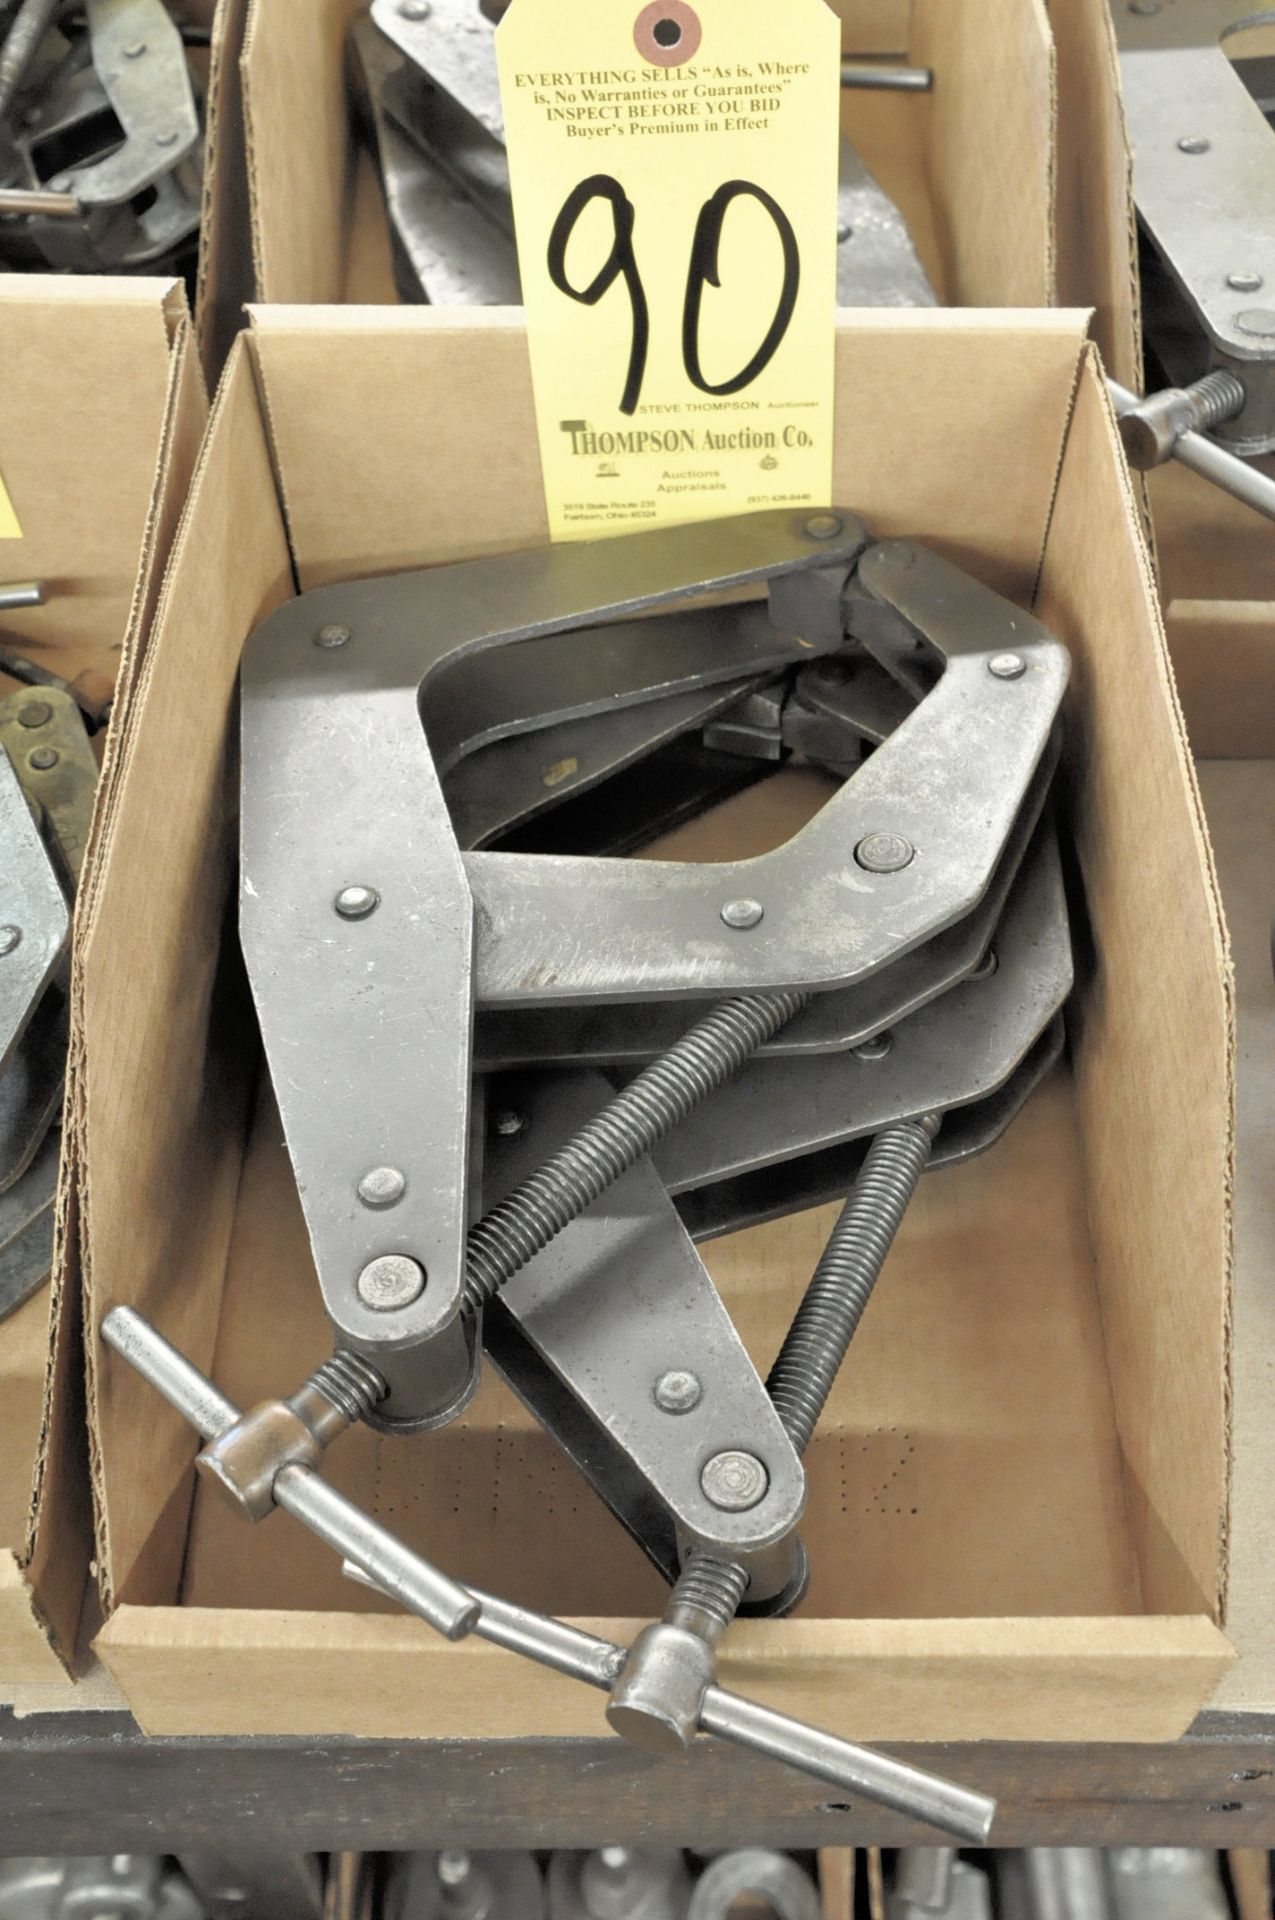 (2) Large Kant Twist Clamps in (1) Box